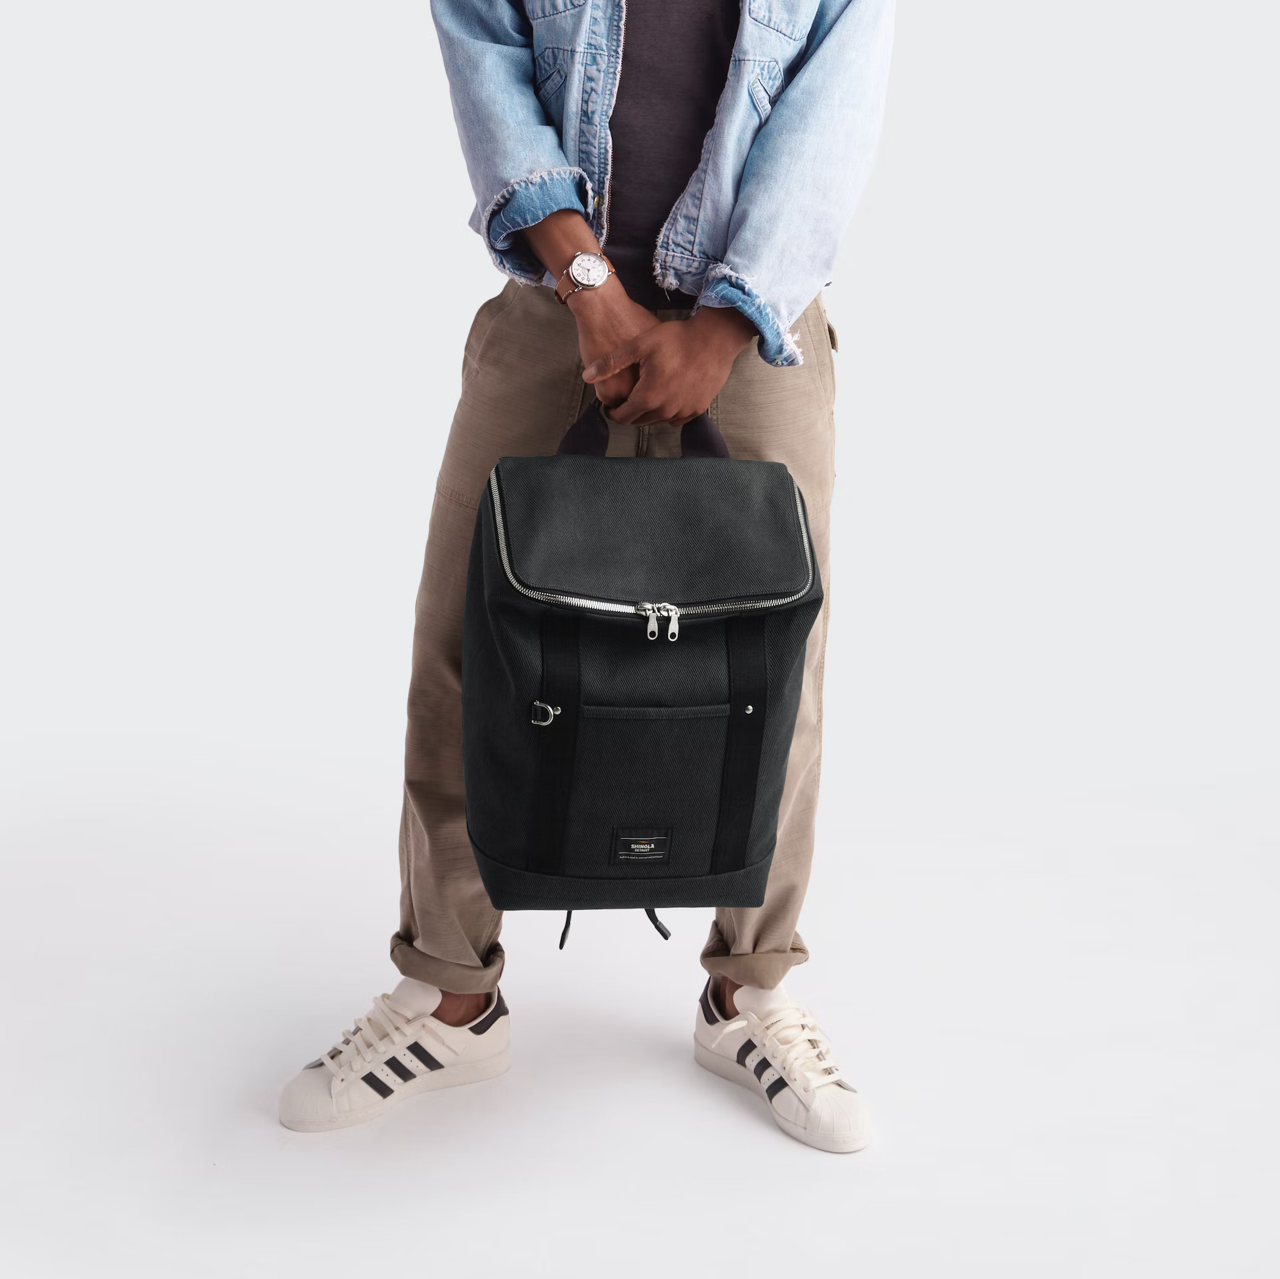 Canvas laptop backpack for work and travel that stands up